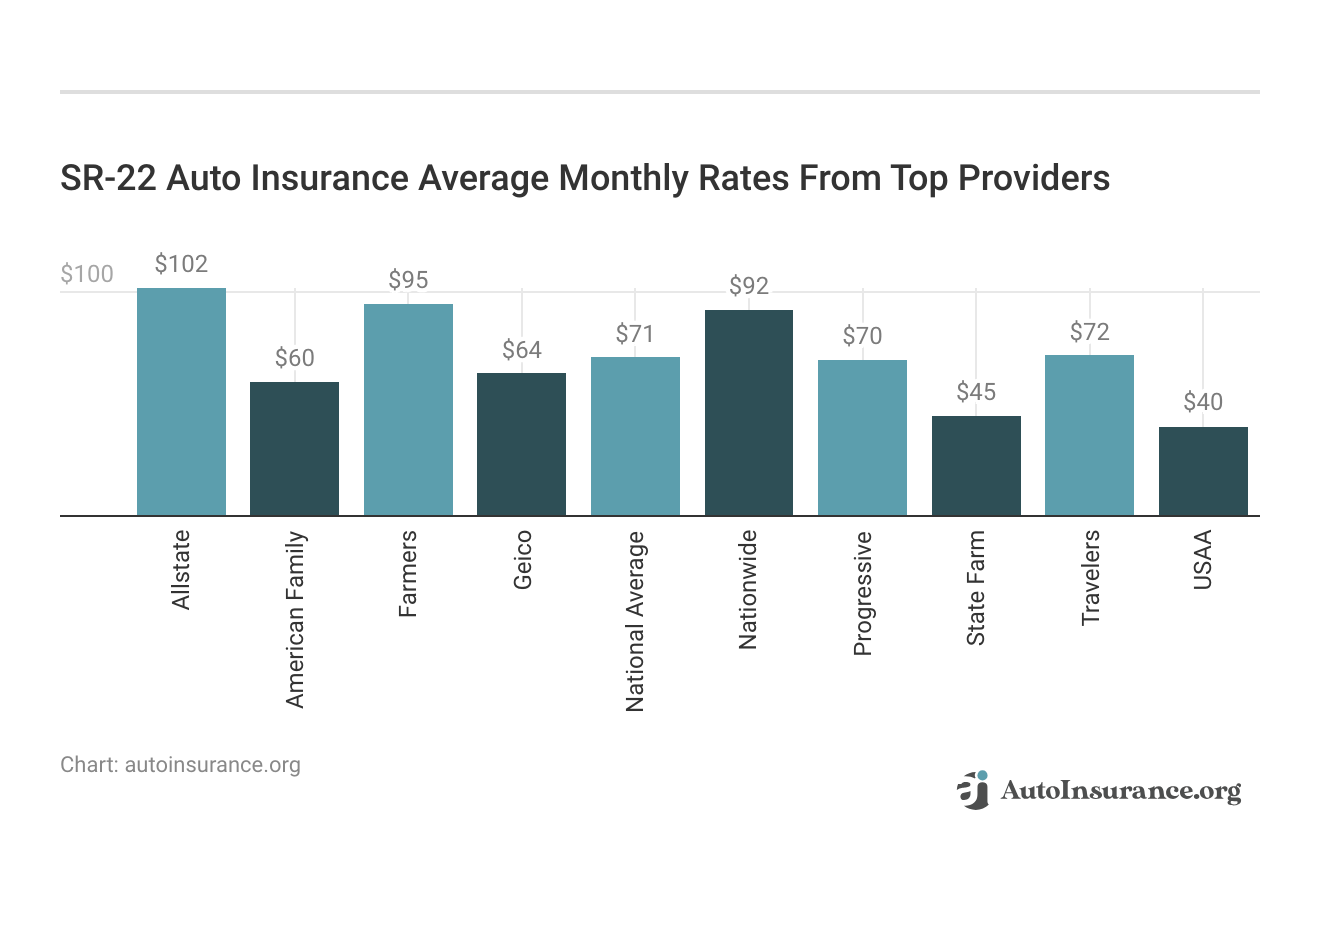 <h3>SR-22 Auto Insurance Average Monthly Rates From Top Providers</h3>